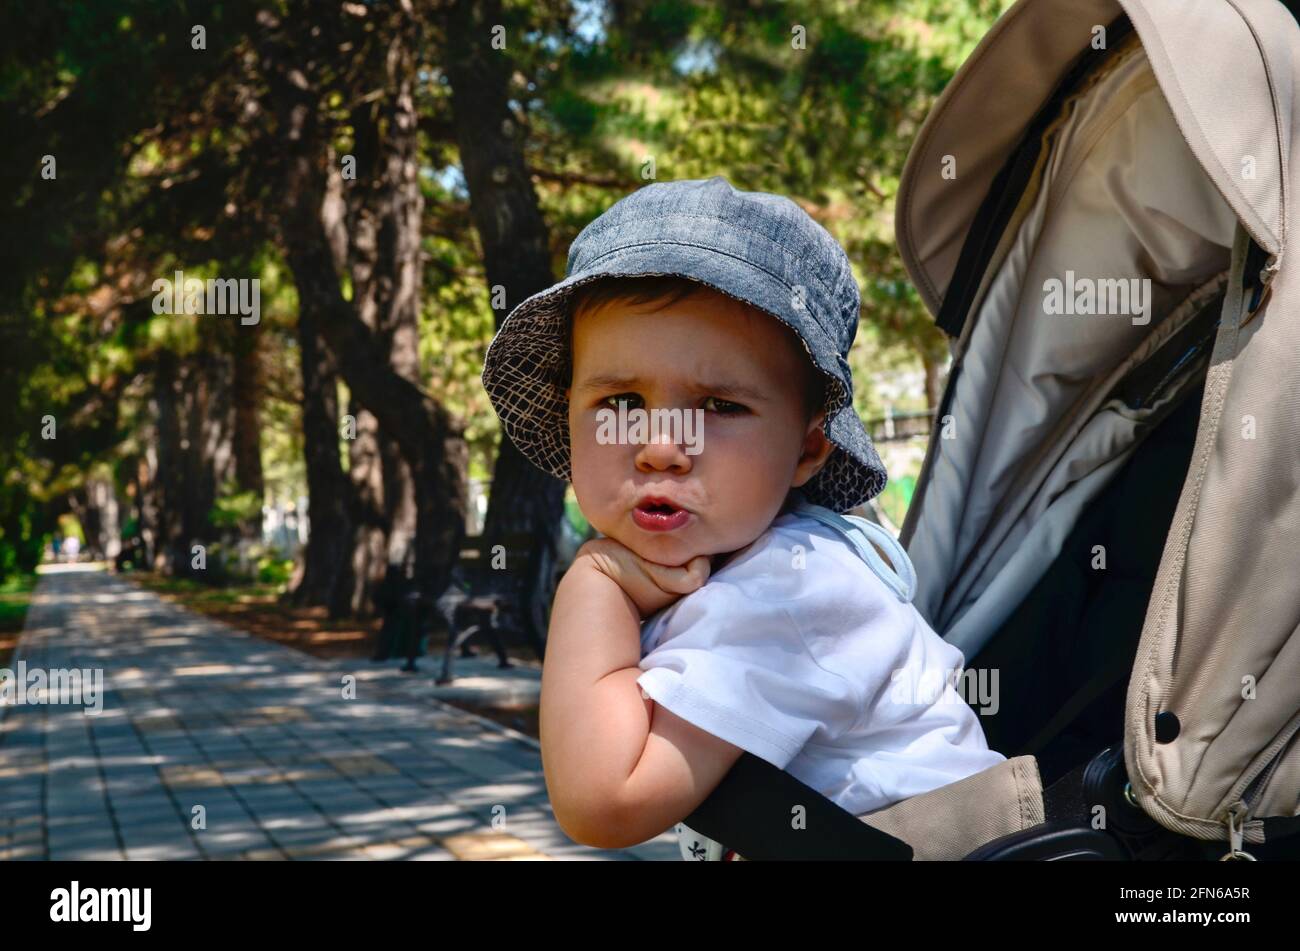 The child sits in a stroller and stares indignantly at the camera, on a walk in a pine park, stopping at the beginning of a shady alley. Stock Photo